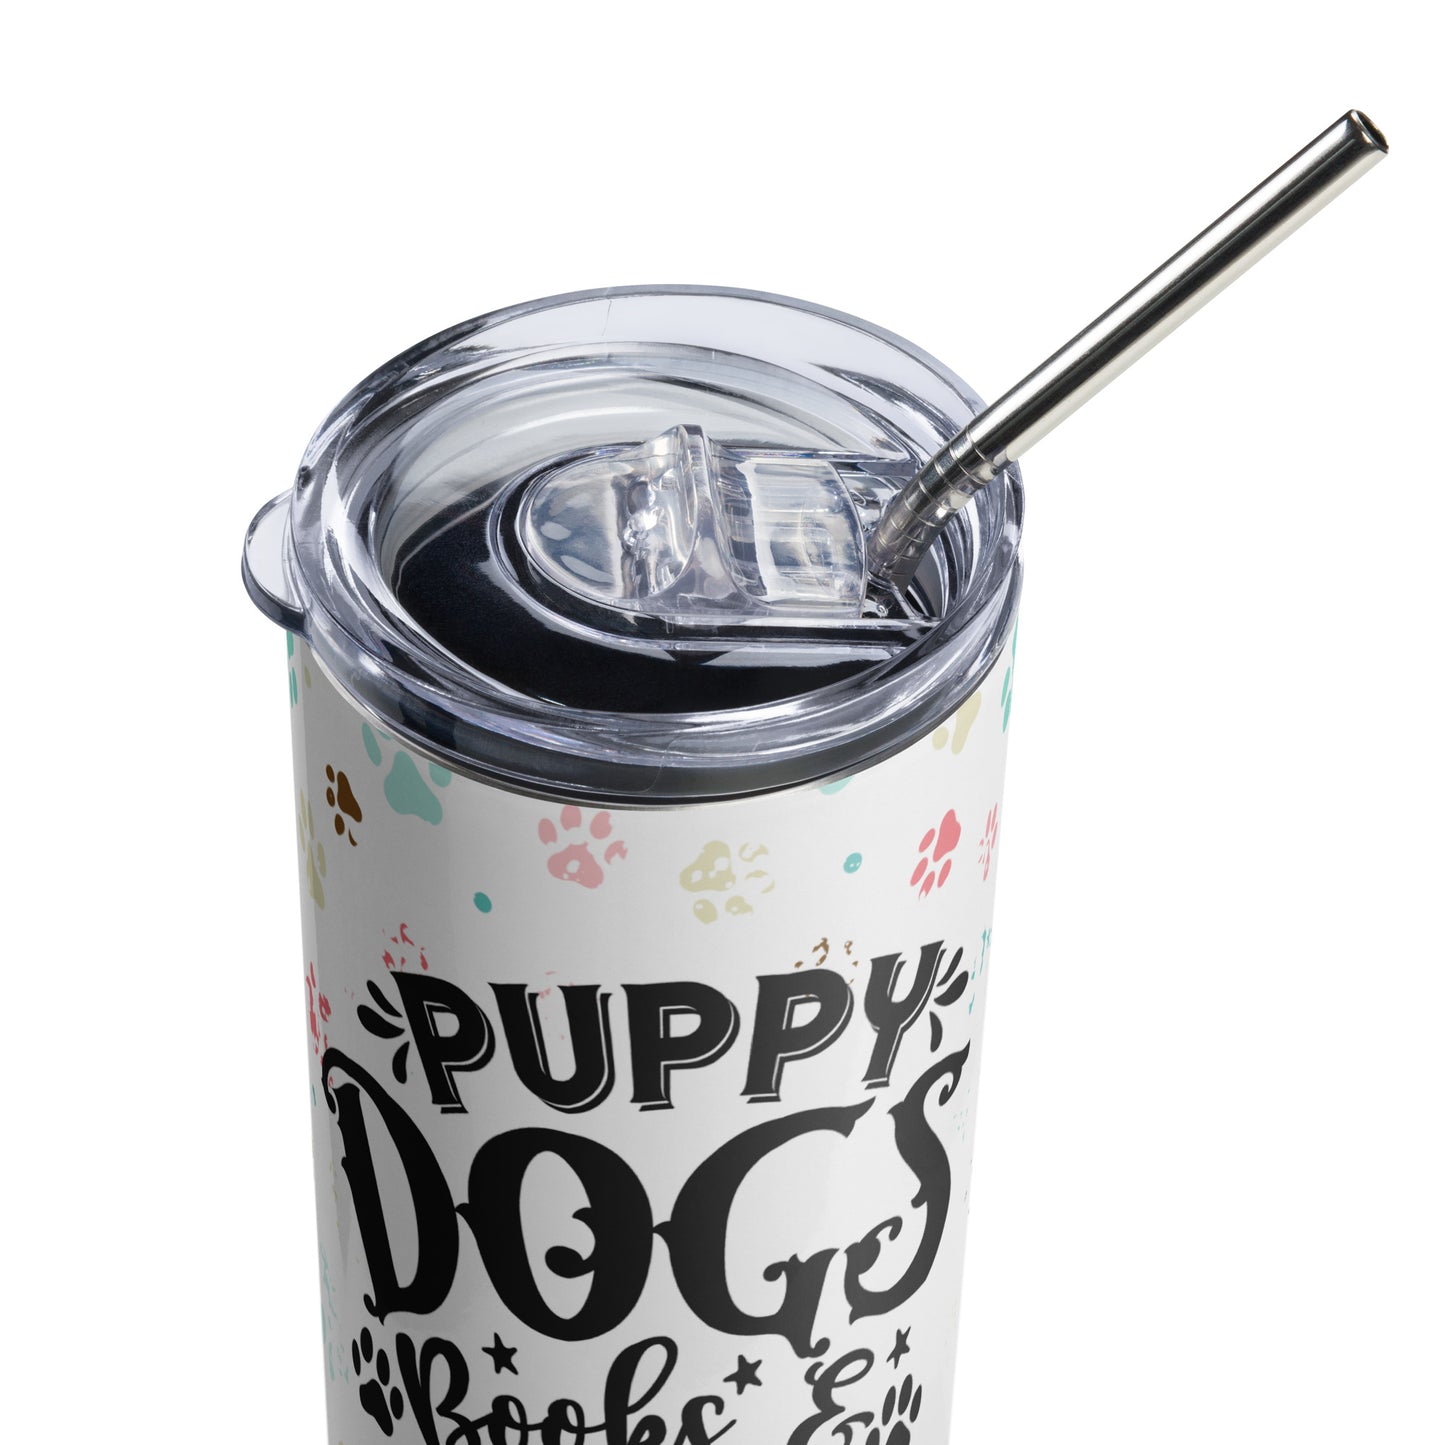 Puppy Dogs Books & Coffee Stainless Steel Tumbler